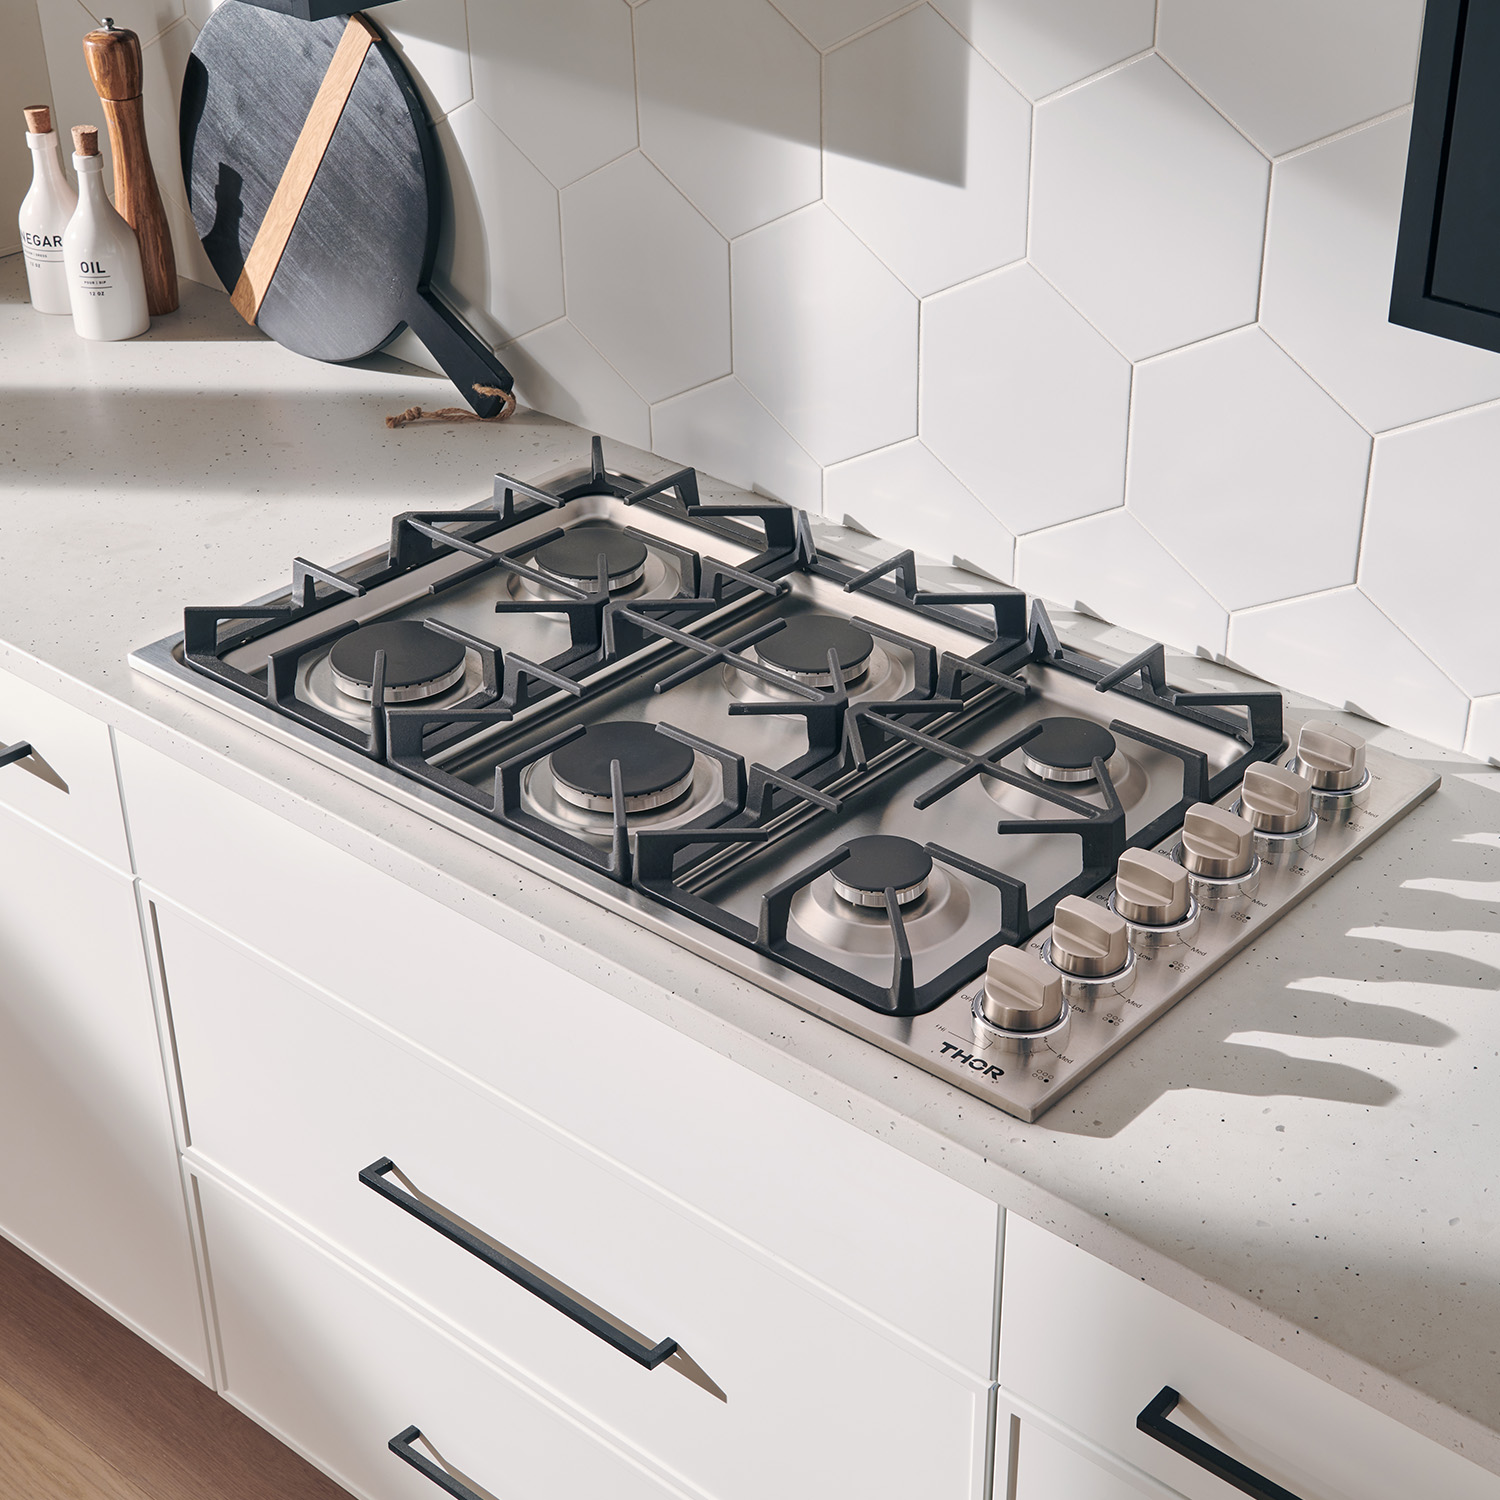 How To Install A Cooktop Stove